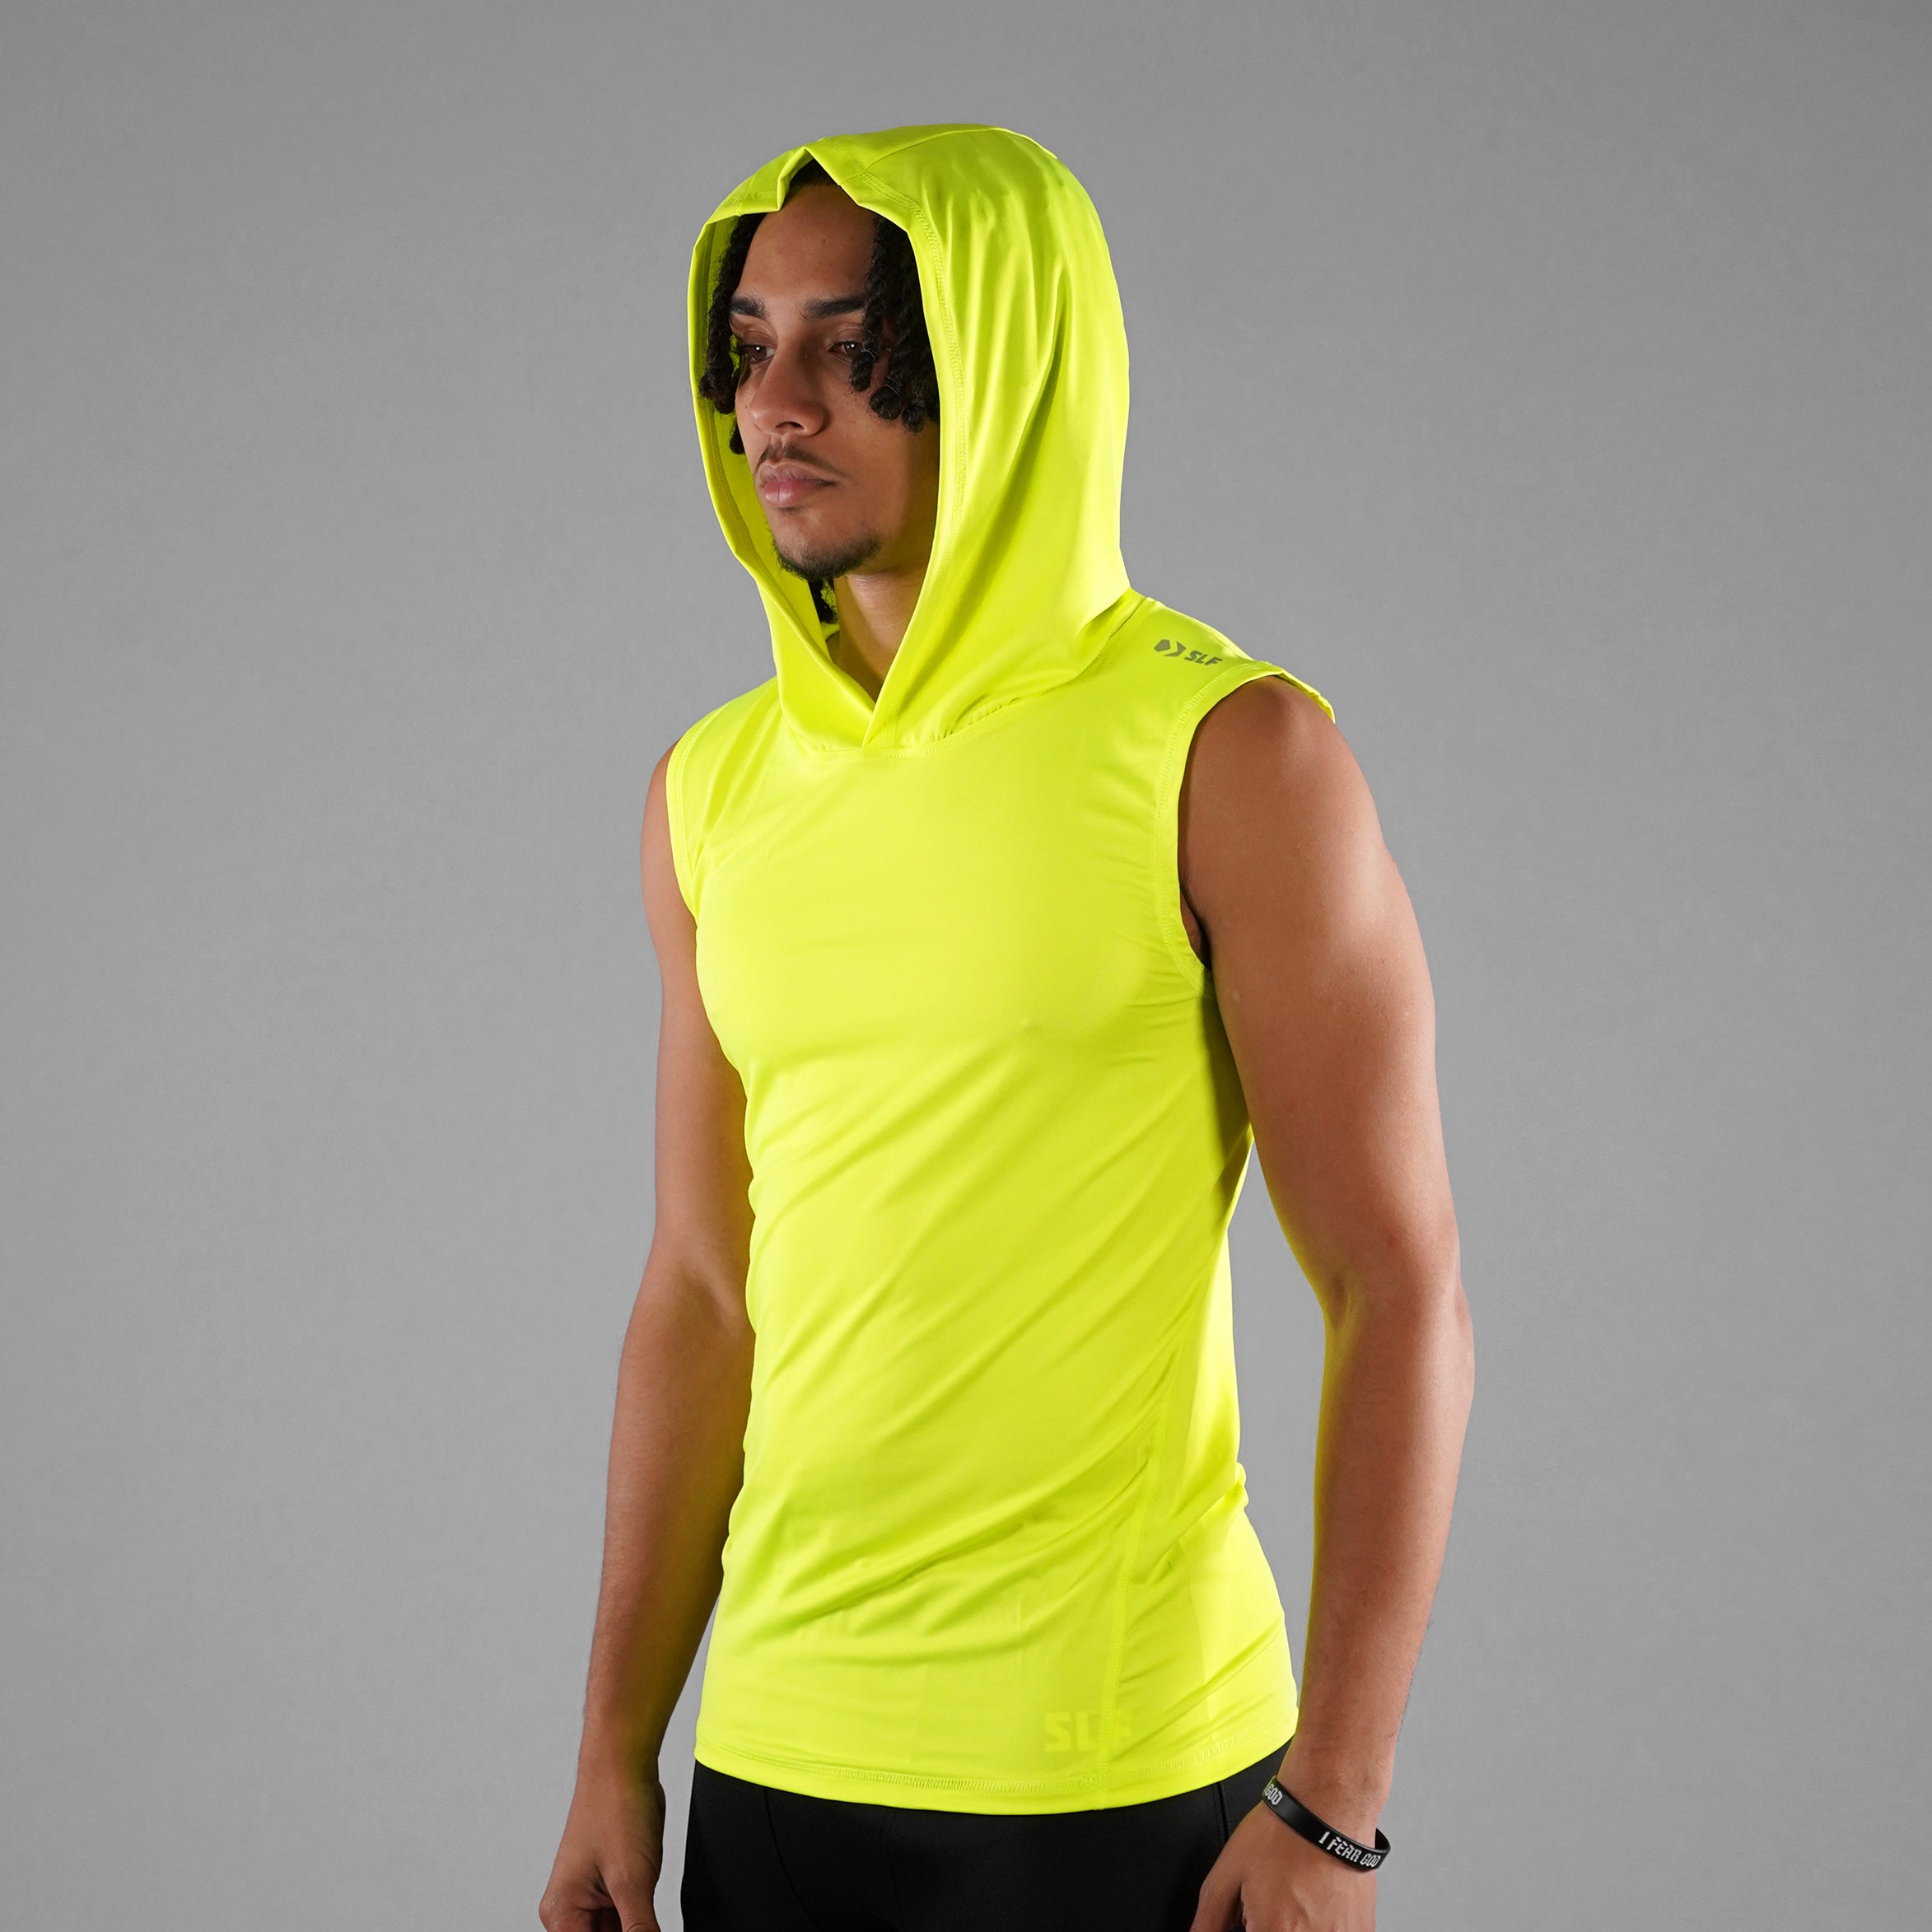 Sleefs Safety Yellow Sleeveless Compression Hoodie Adult